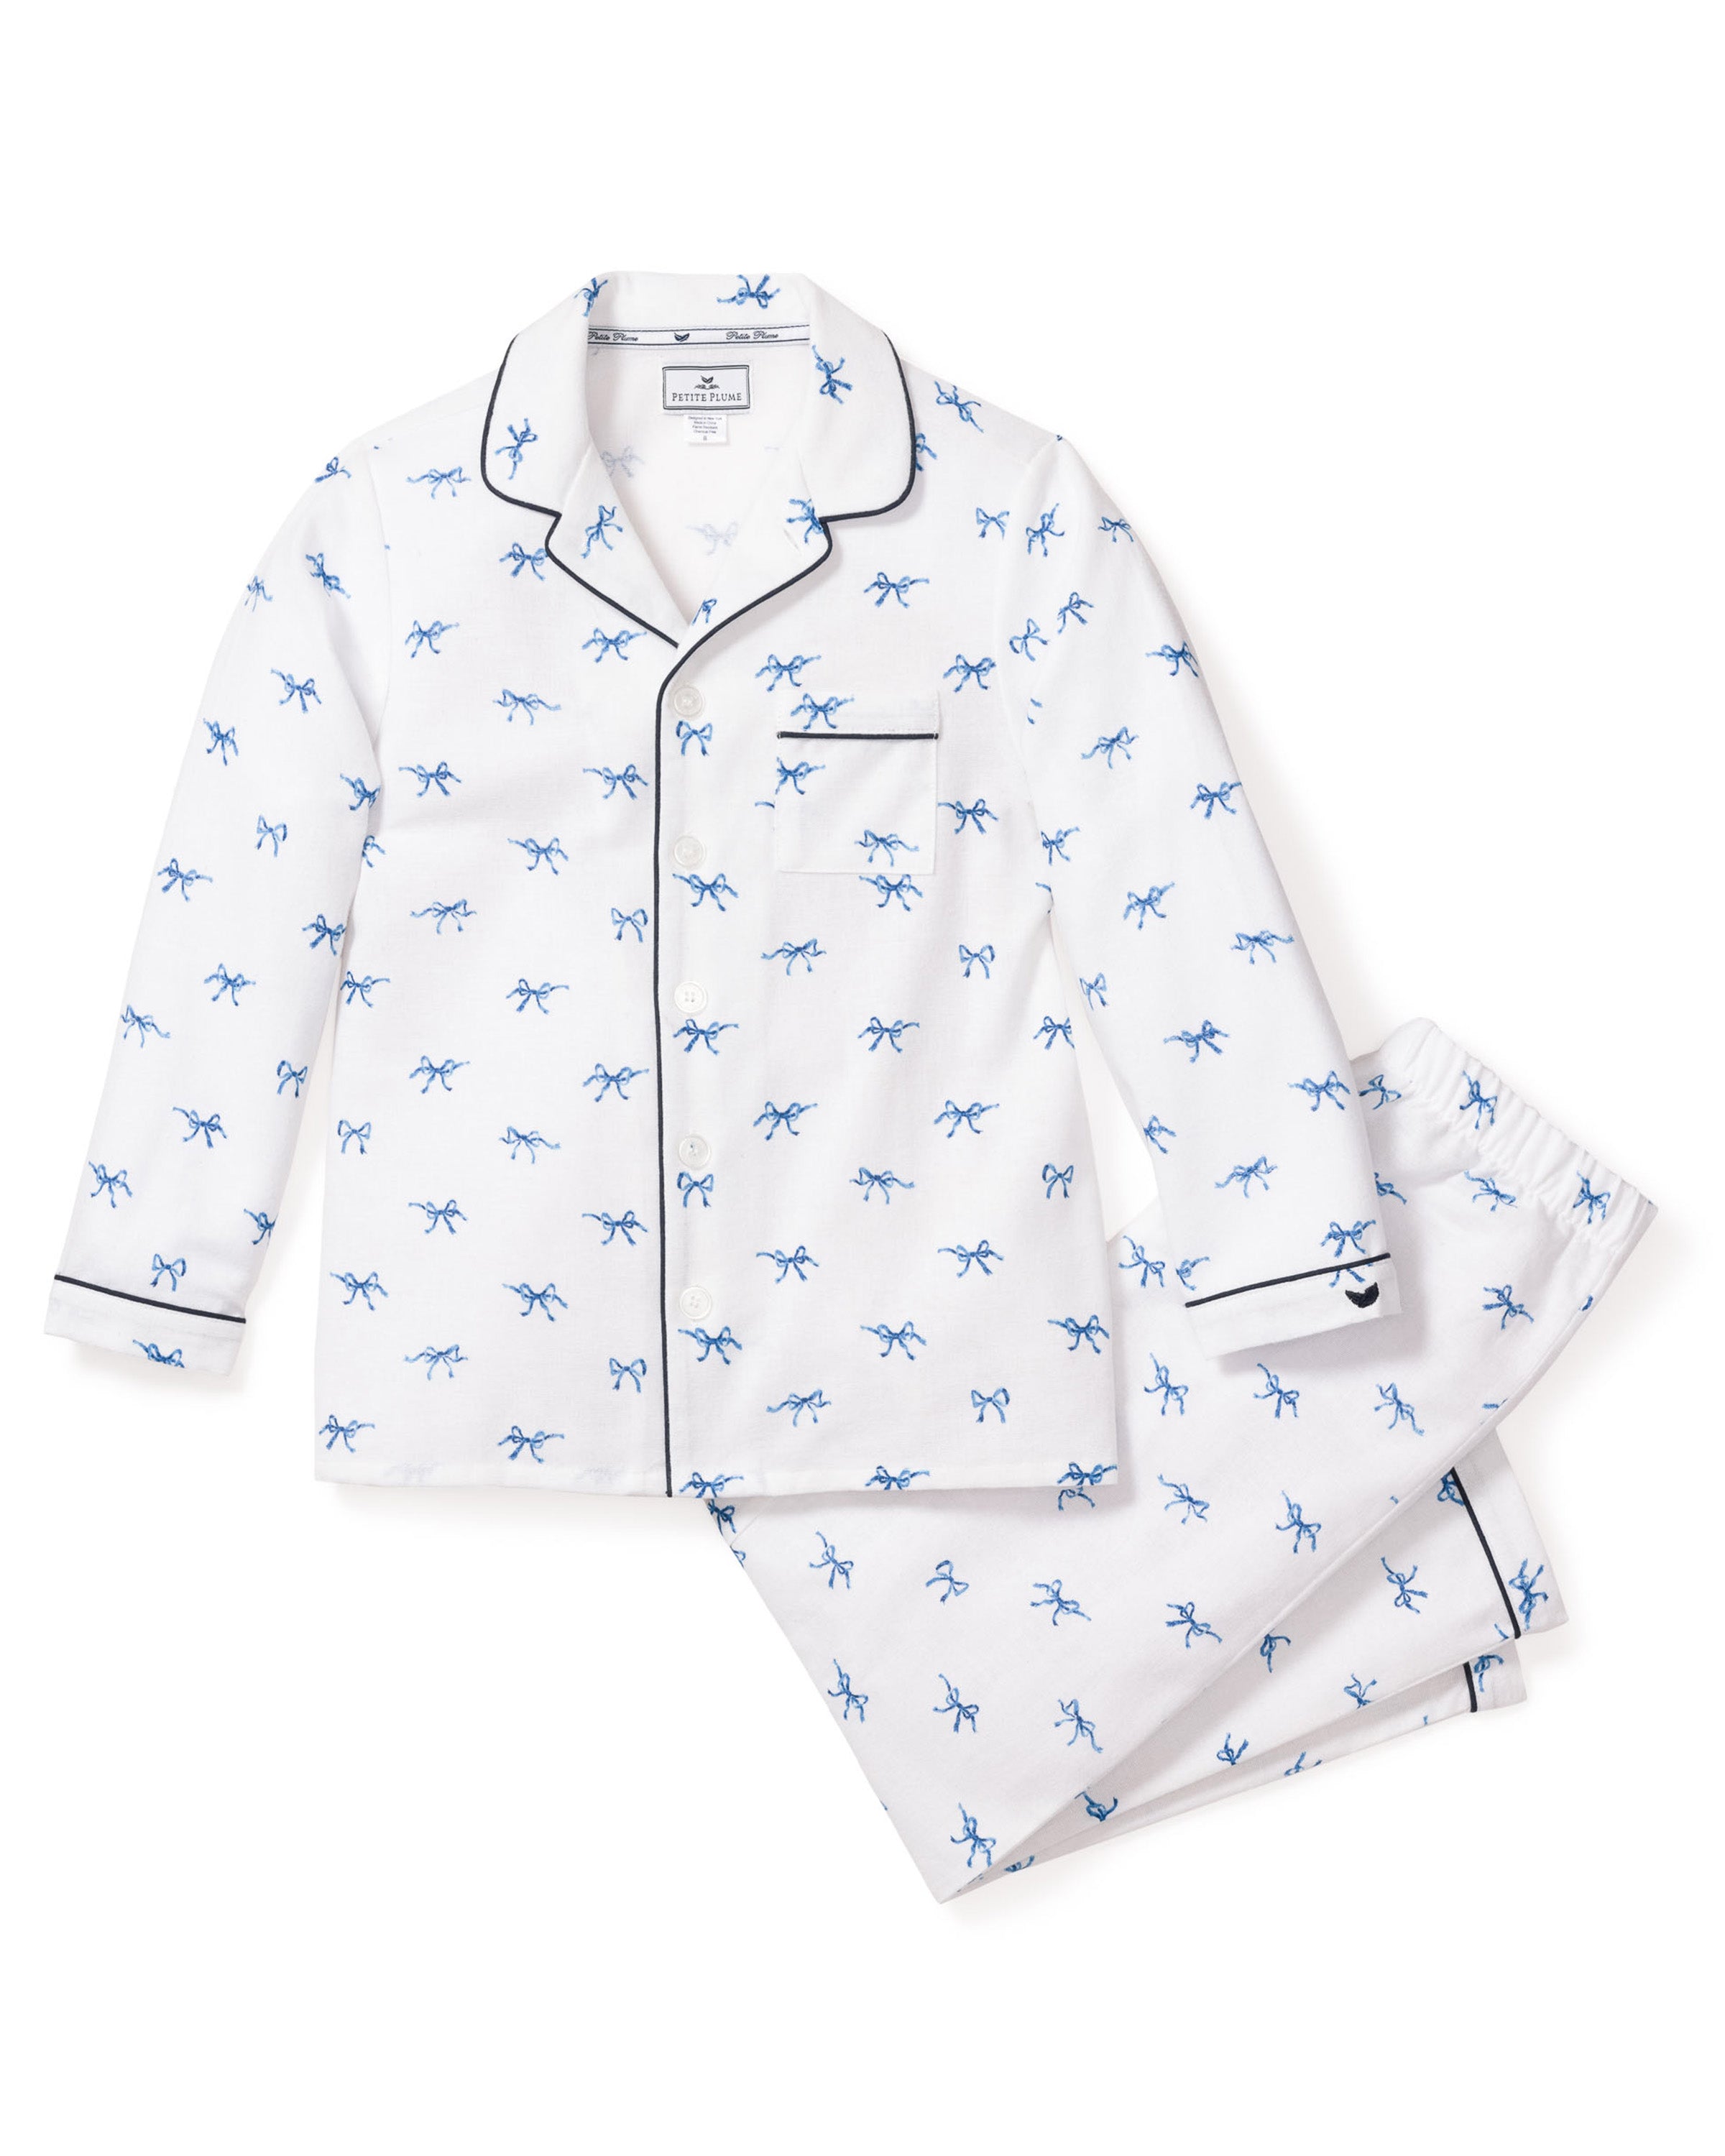 Kid's Flannel Pajama Set in Fanciful Bows